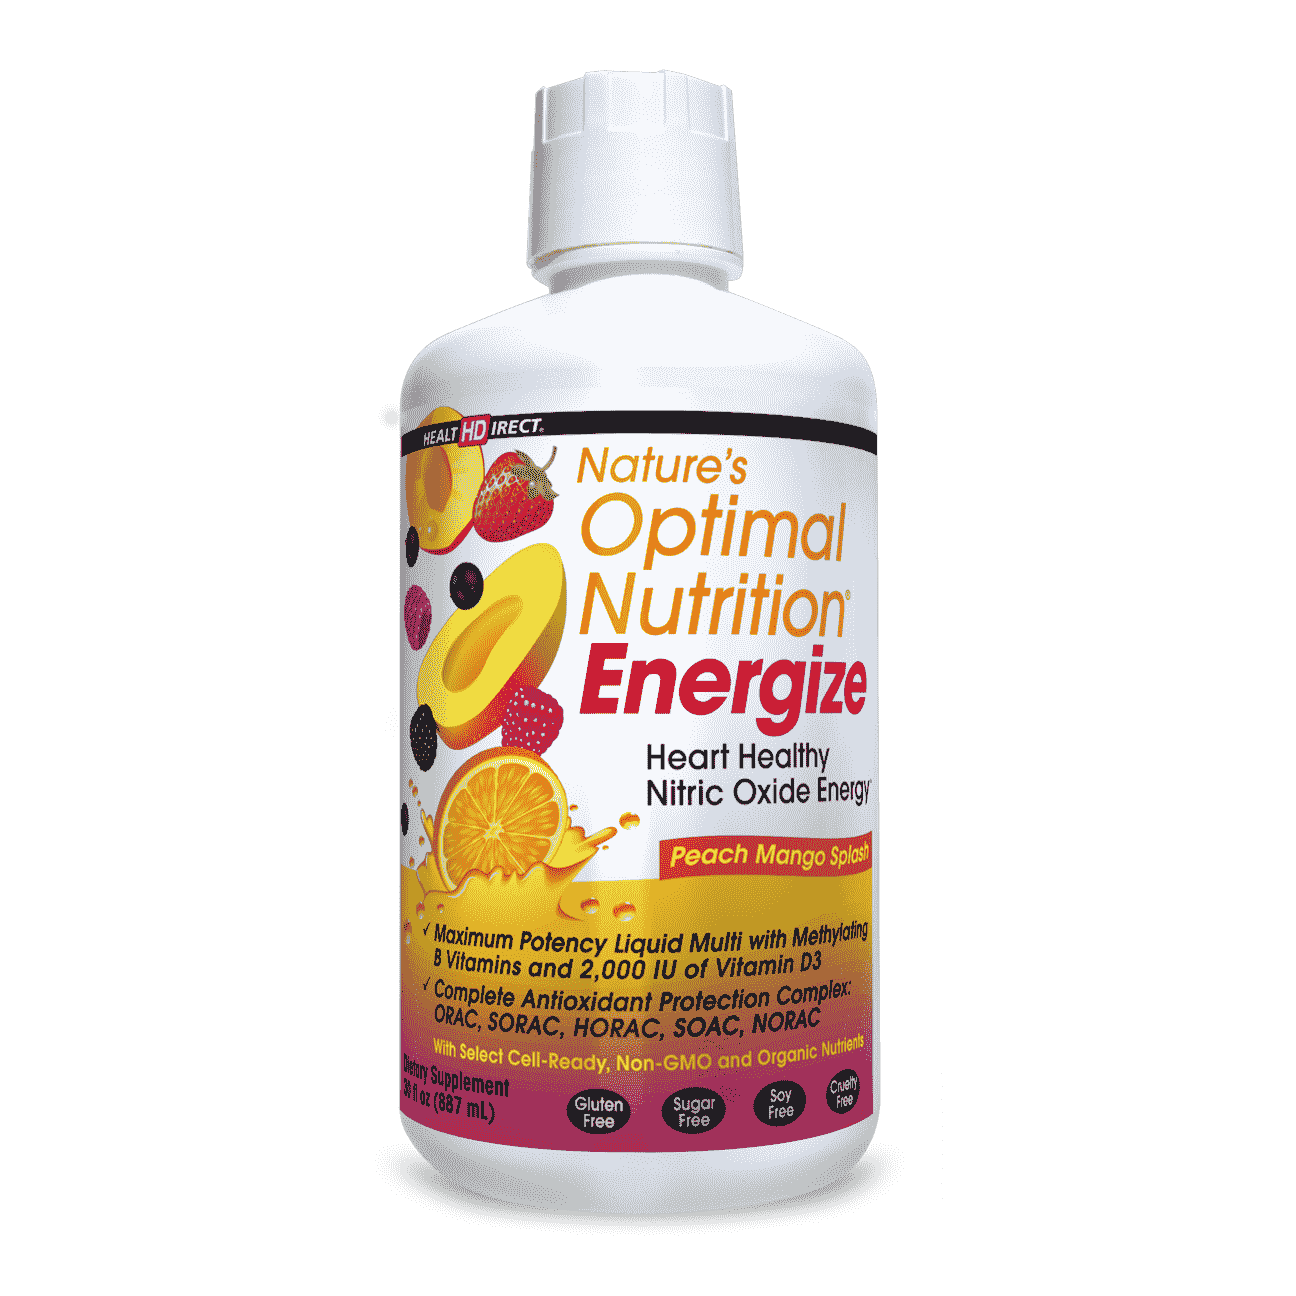 Health Direct Nature's Optimal Nutrition Energizer